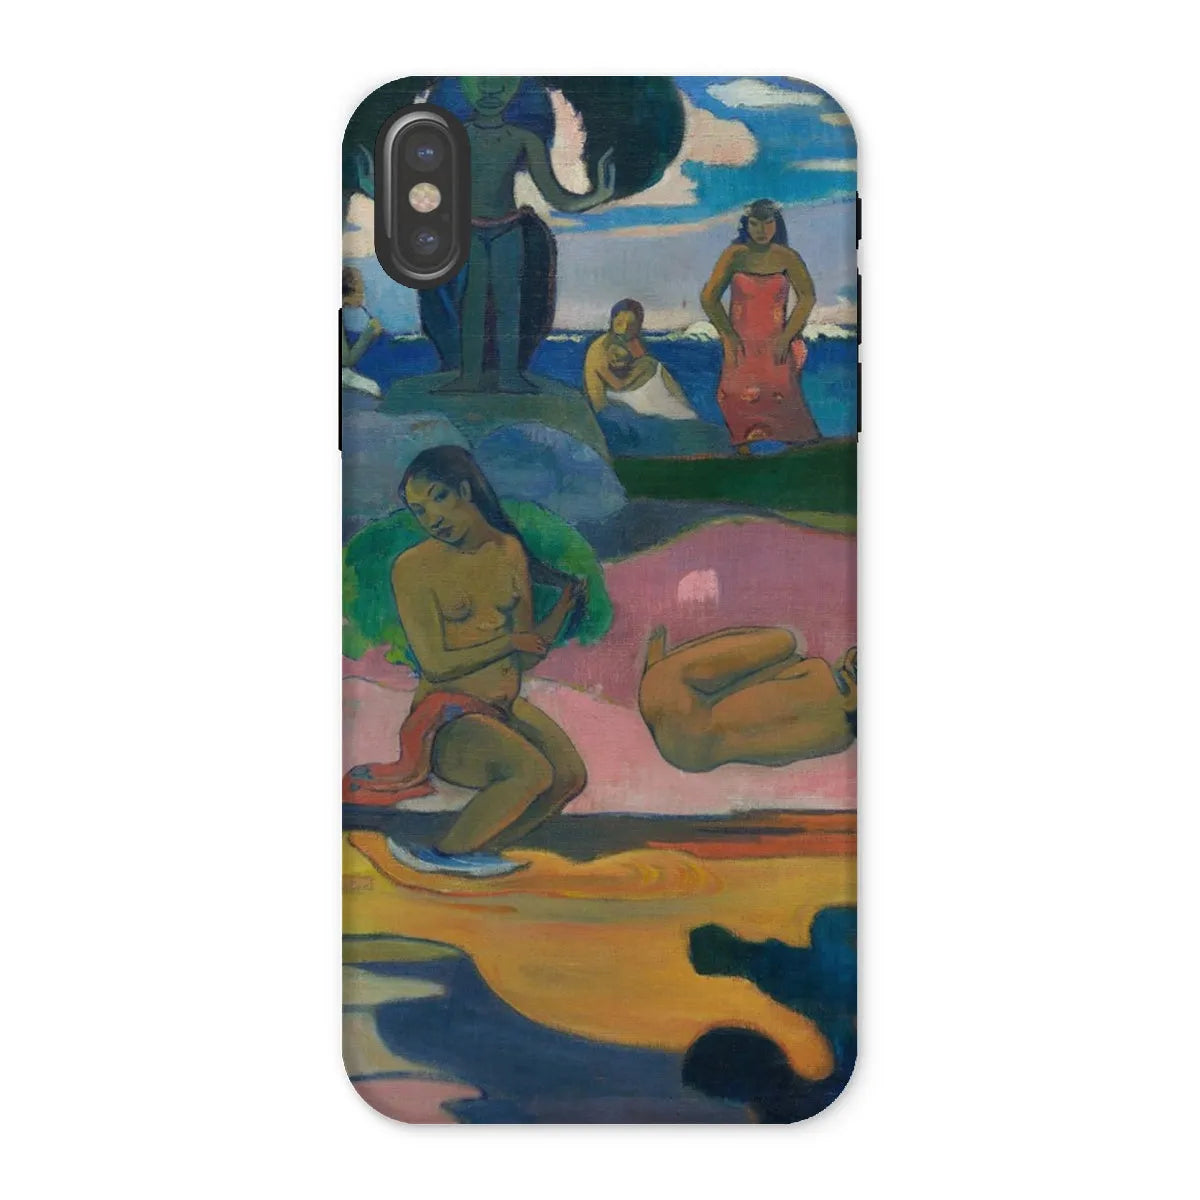 Day Of The God French Tahitian Art Phone Case - Paul Gauguin - Iphone x / Matte - Mobile Phone Cases - Aesthetic Art